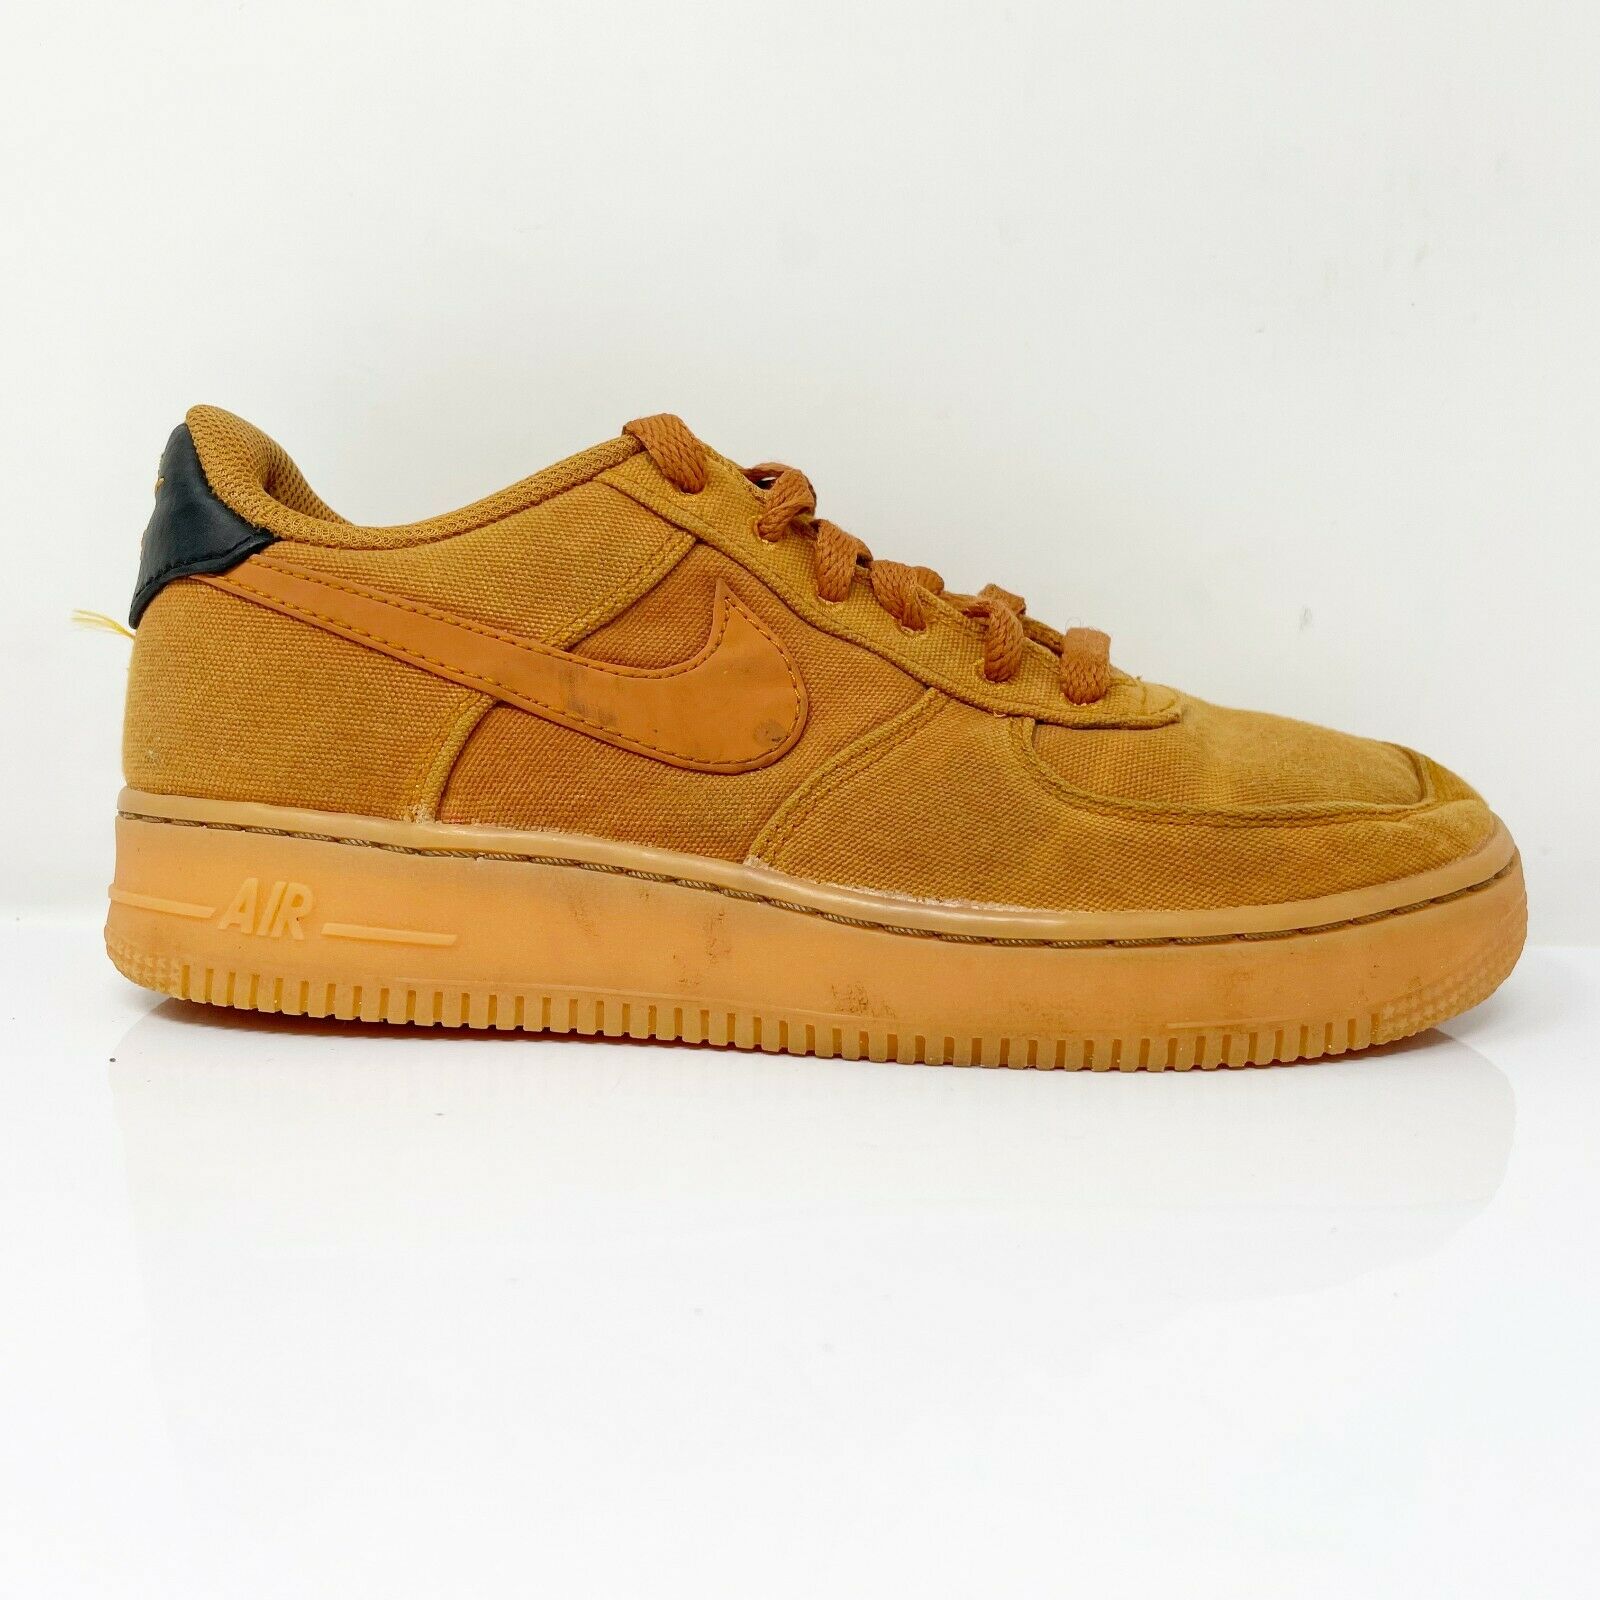 Nike Boys Air Force 1 Low LV8 AR0735-800 Brown Running Shoes Sneakers Size 5.5Y